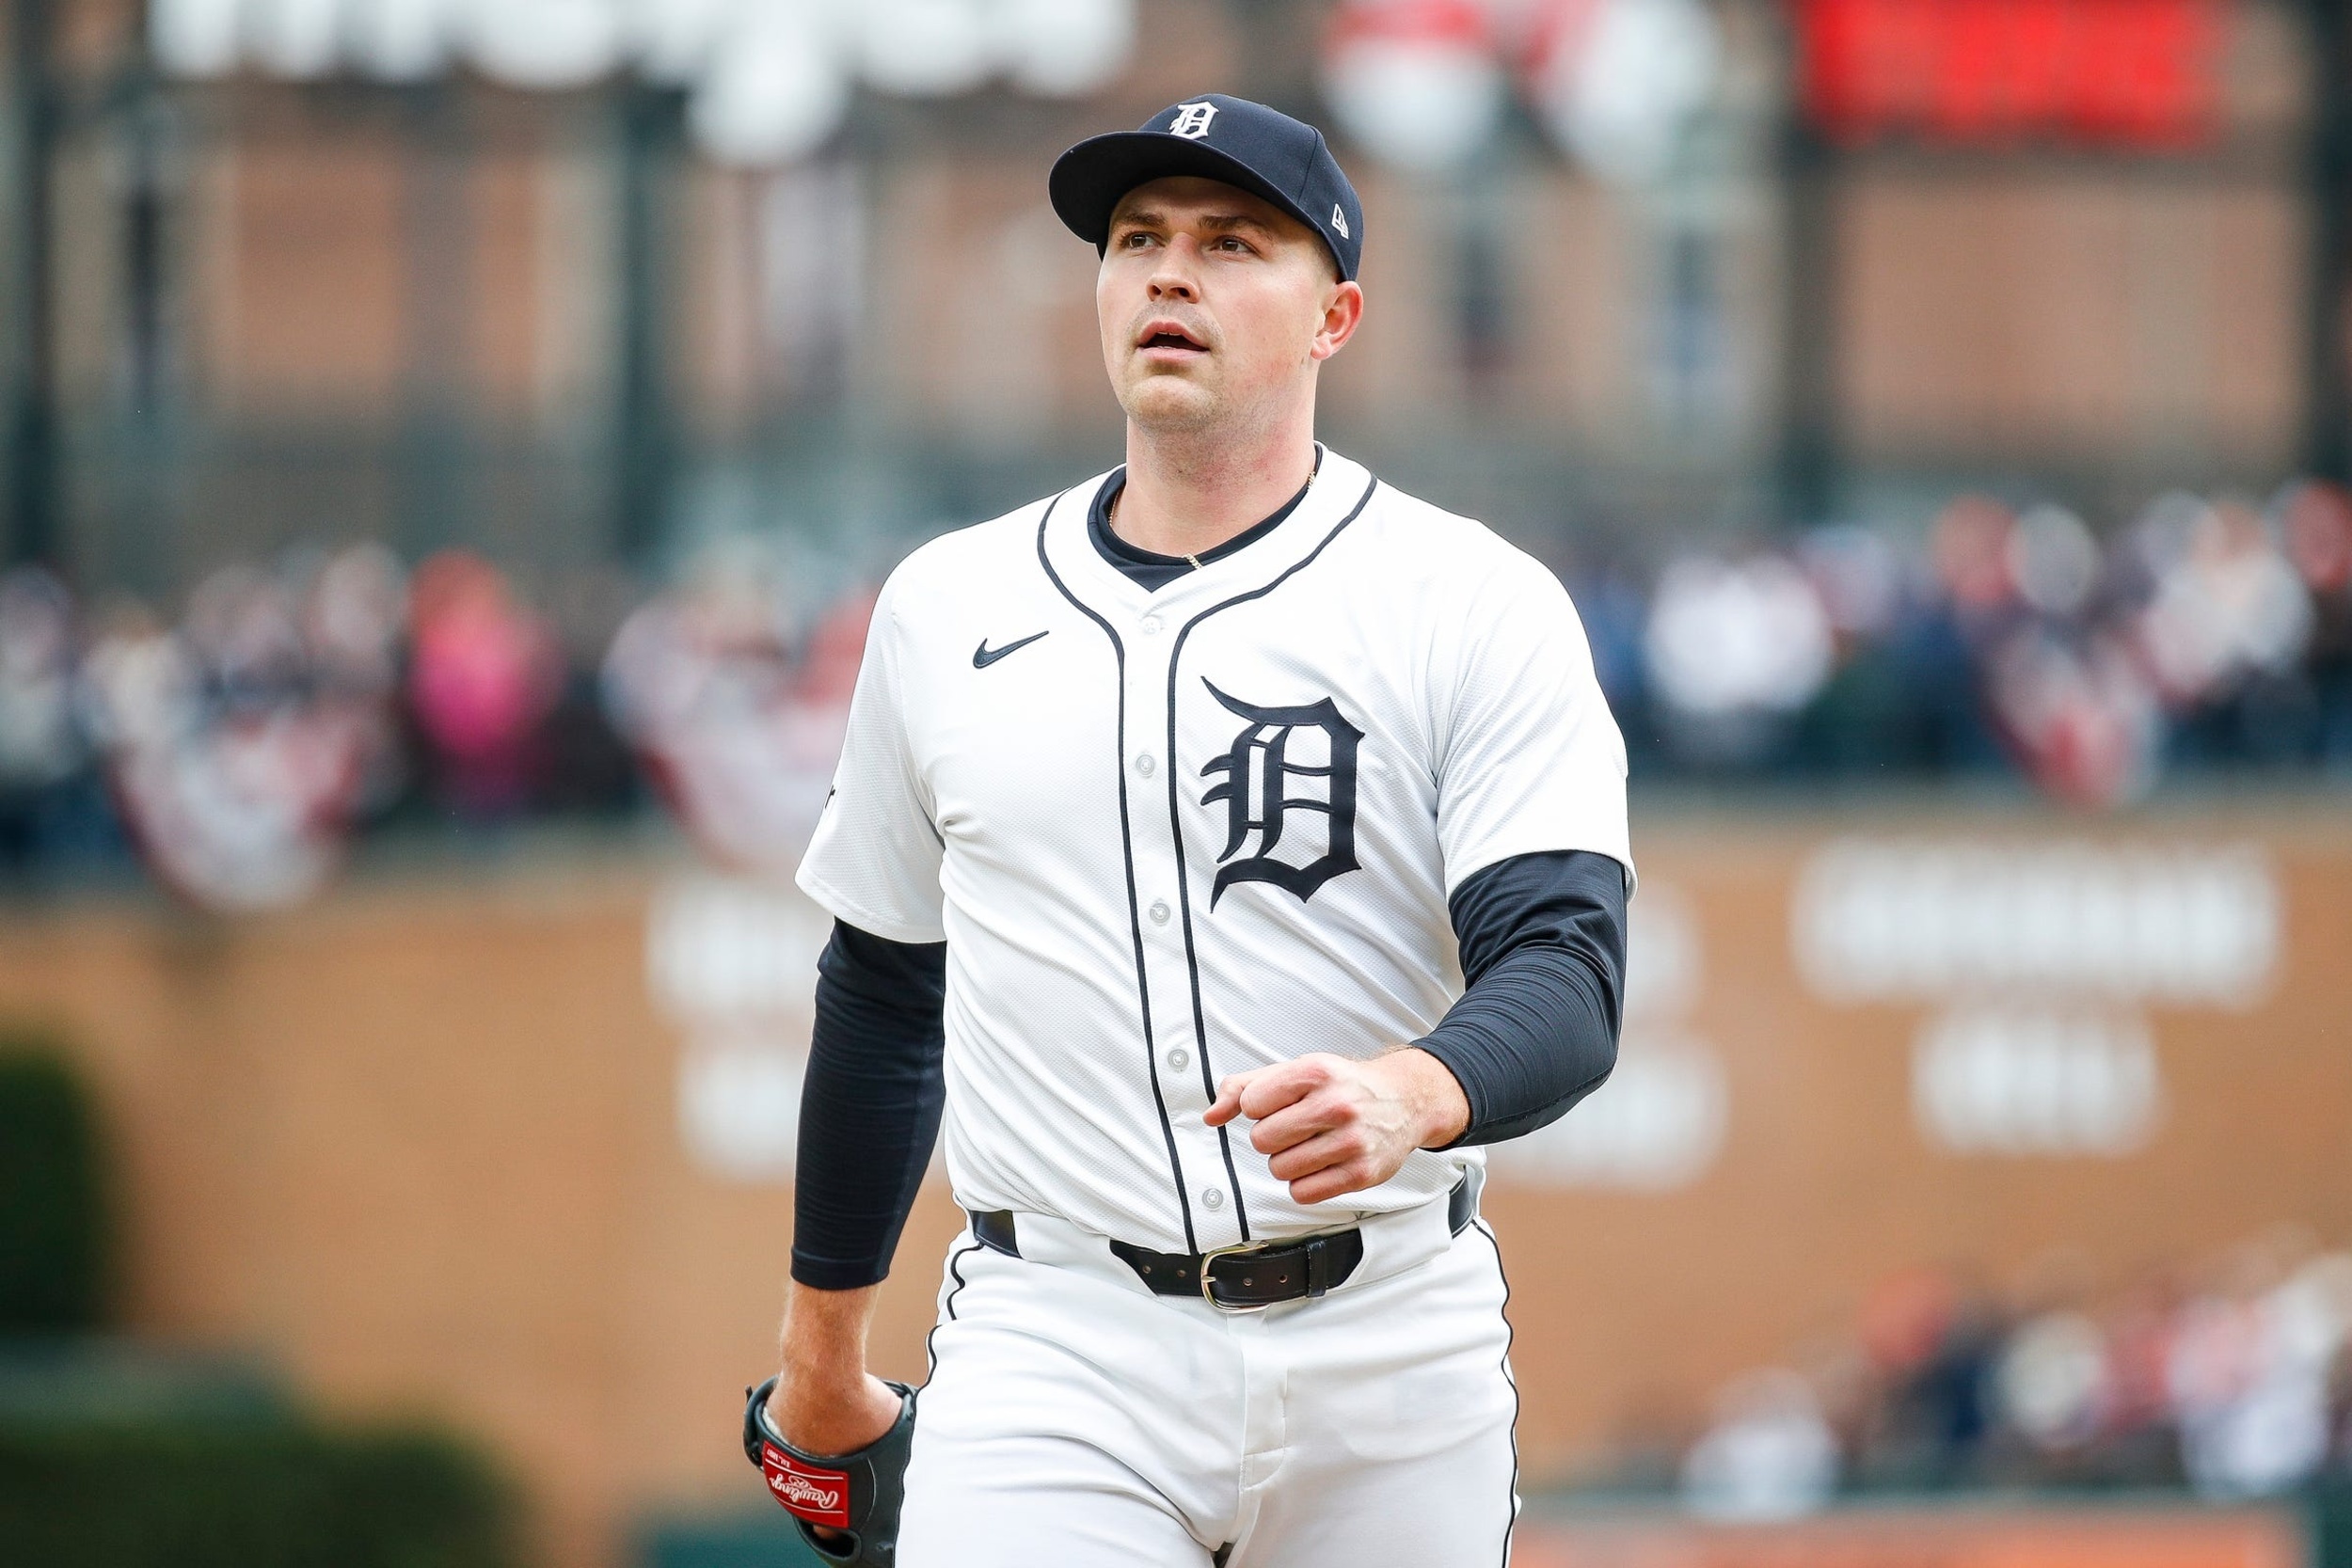 tigers ace explains why he wanted catcher to let foul ball drop during teammate's gem